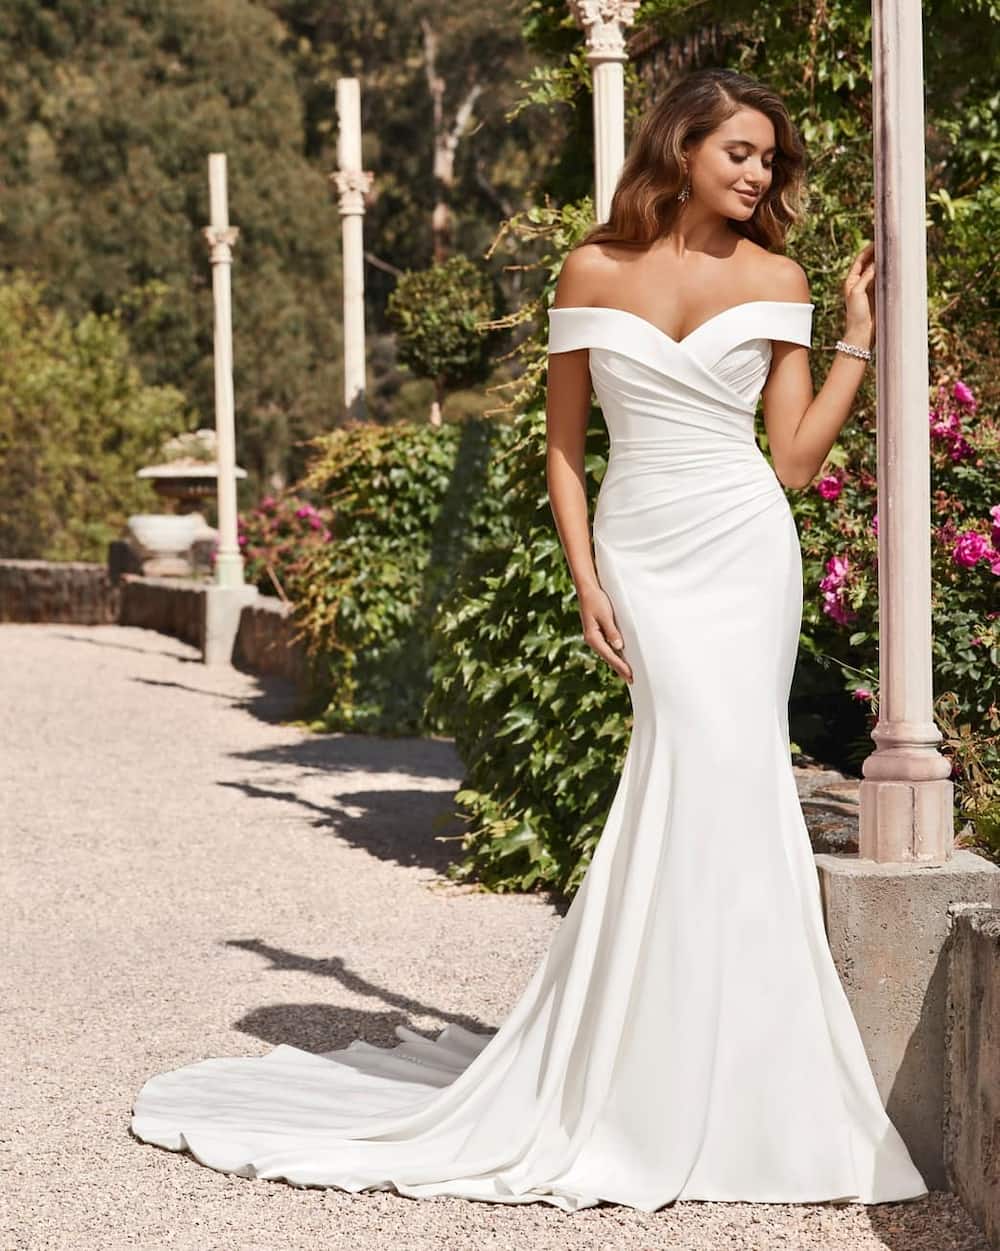 Crepe material styles for wedding dresses